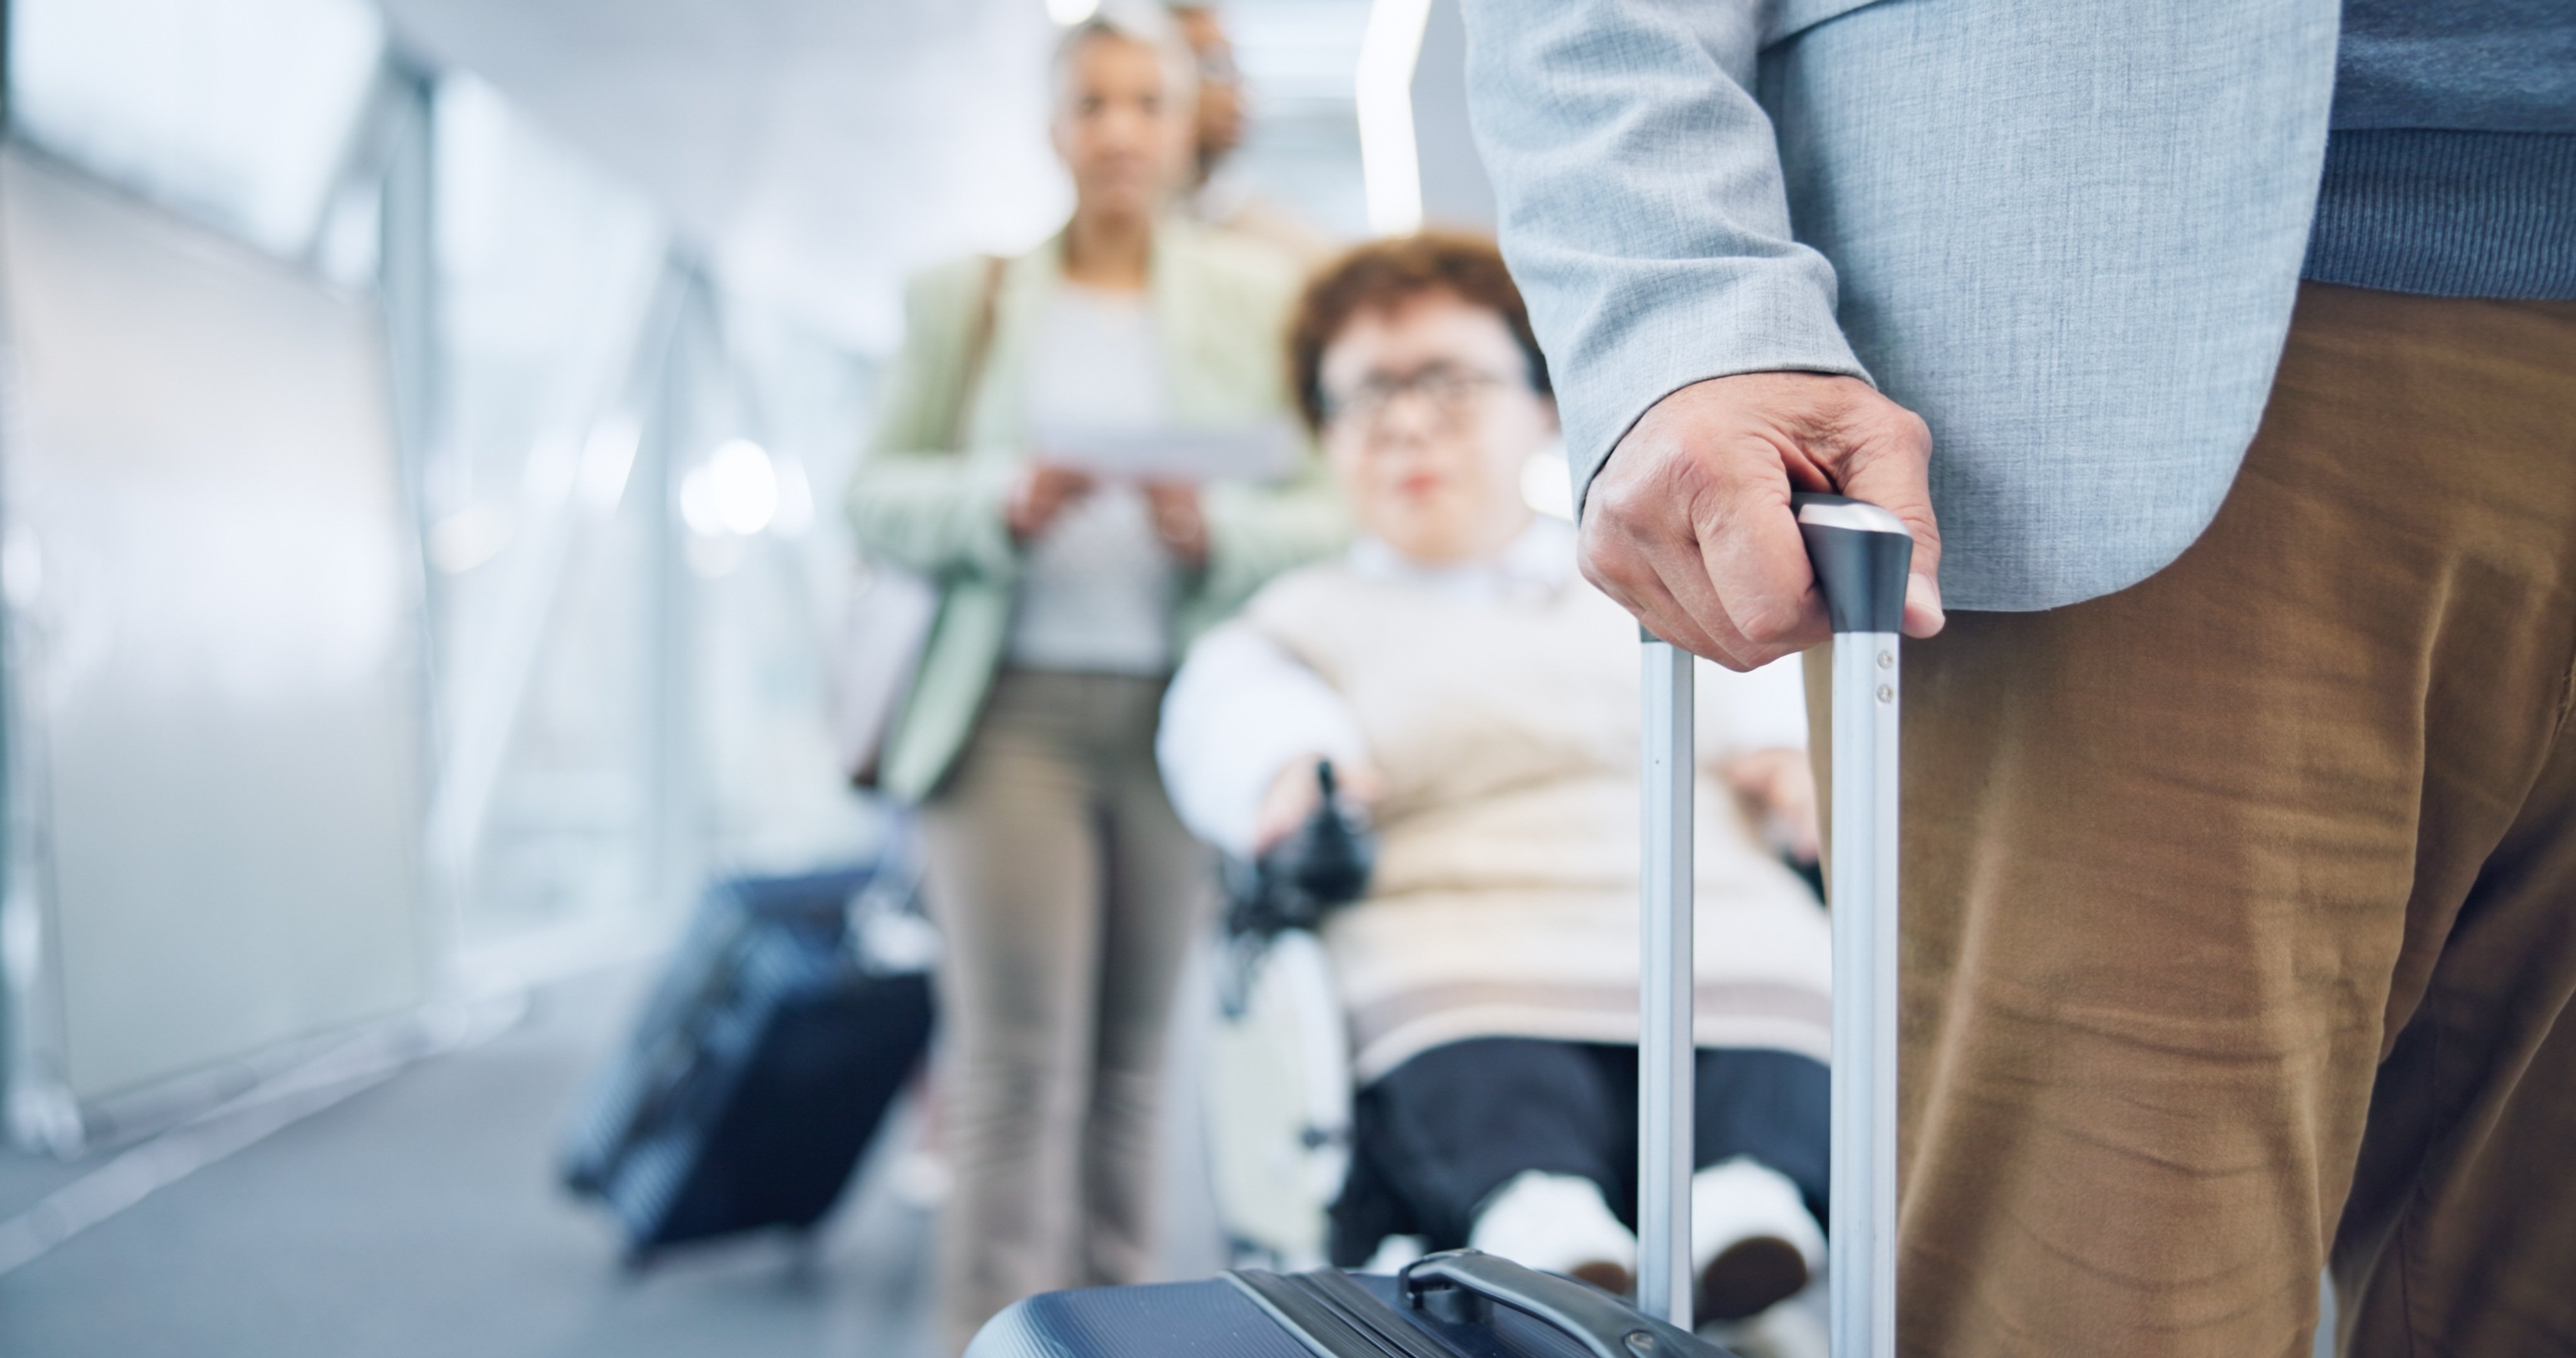 A close-up image of a hand holding the handle of rolling luggage, with a blurry background which has a wheelchair user in line behind them.